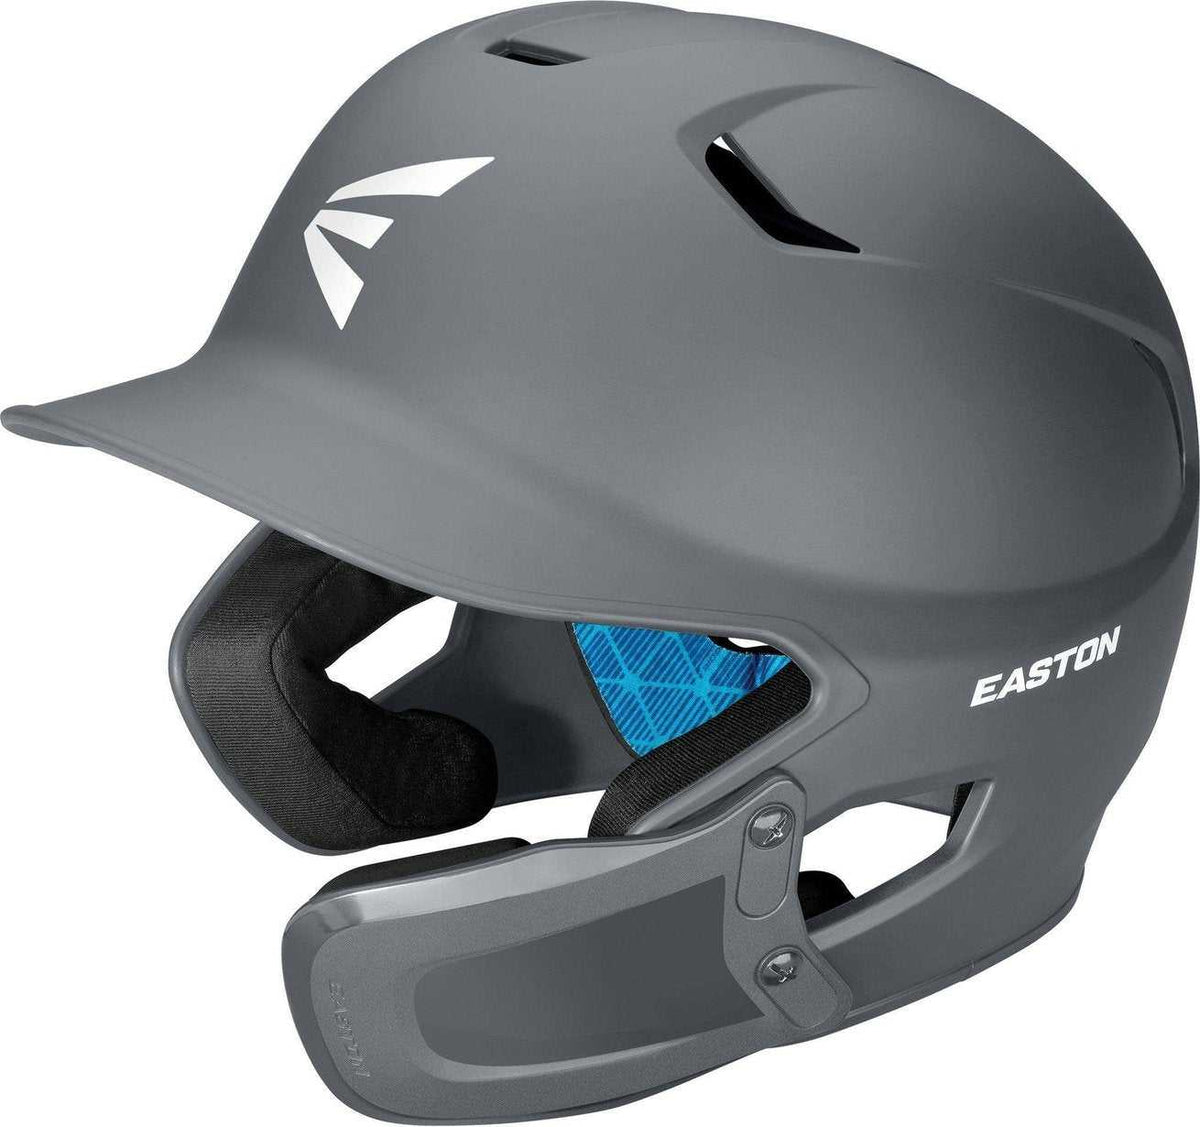 Easton Z5 2.0 Solid Batting Helmet with Universal Jaw Guard - Charcoal - HIT A Double